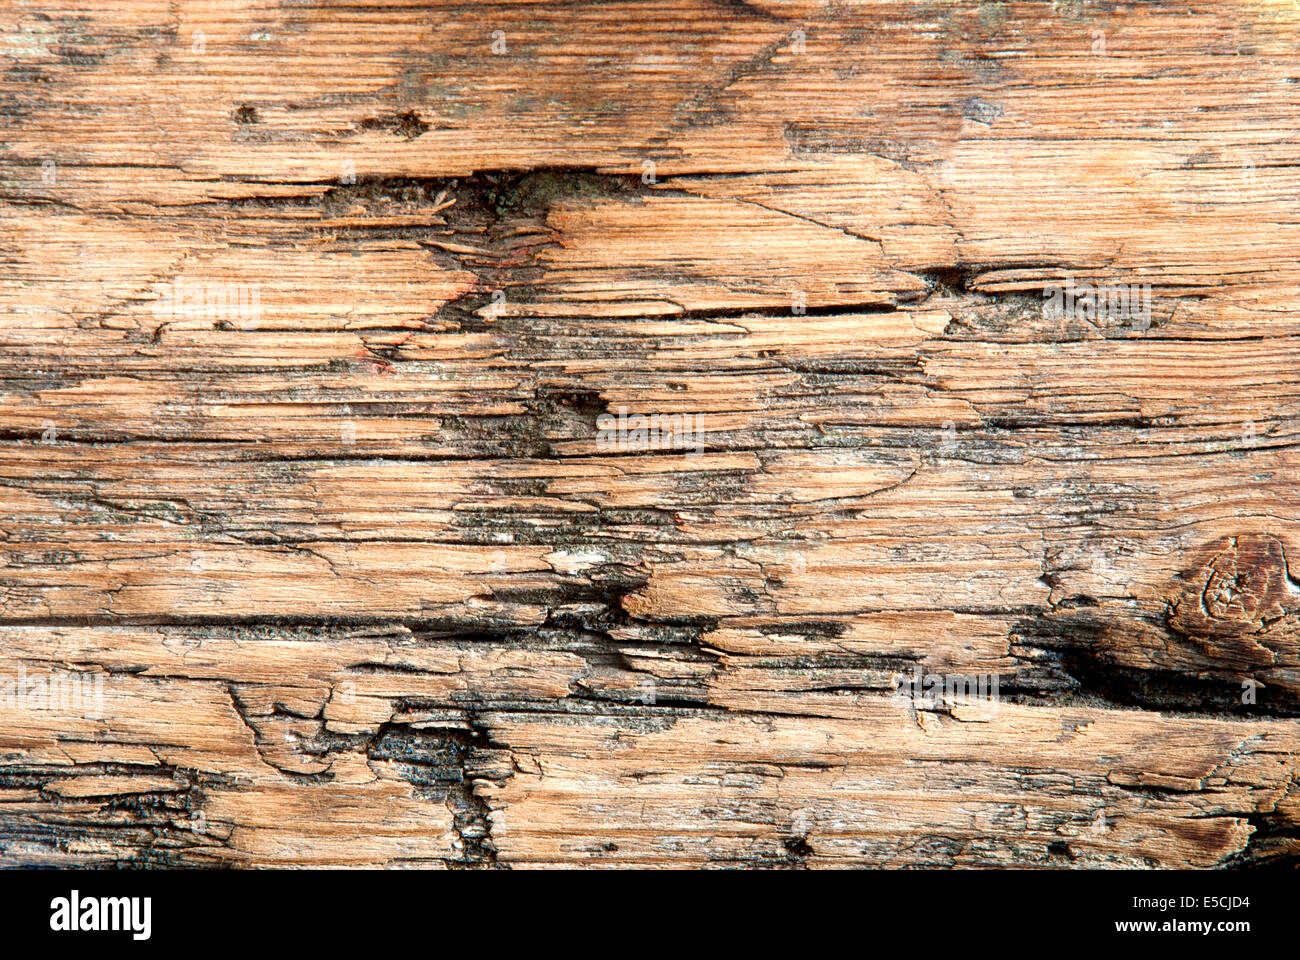 Wooden Texture, Seamless Wood Background, Old Plank Stock Photo - Alamy